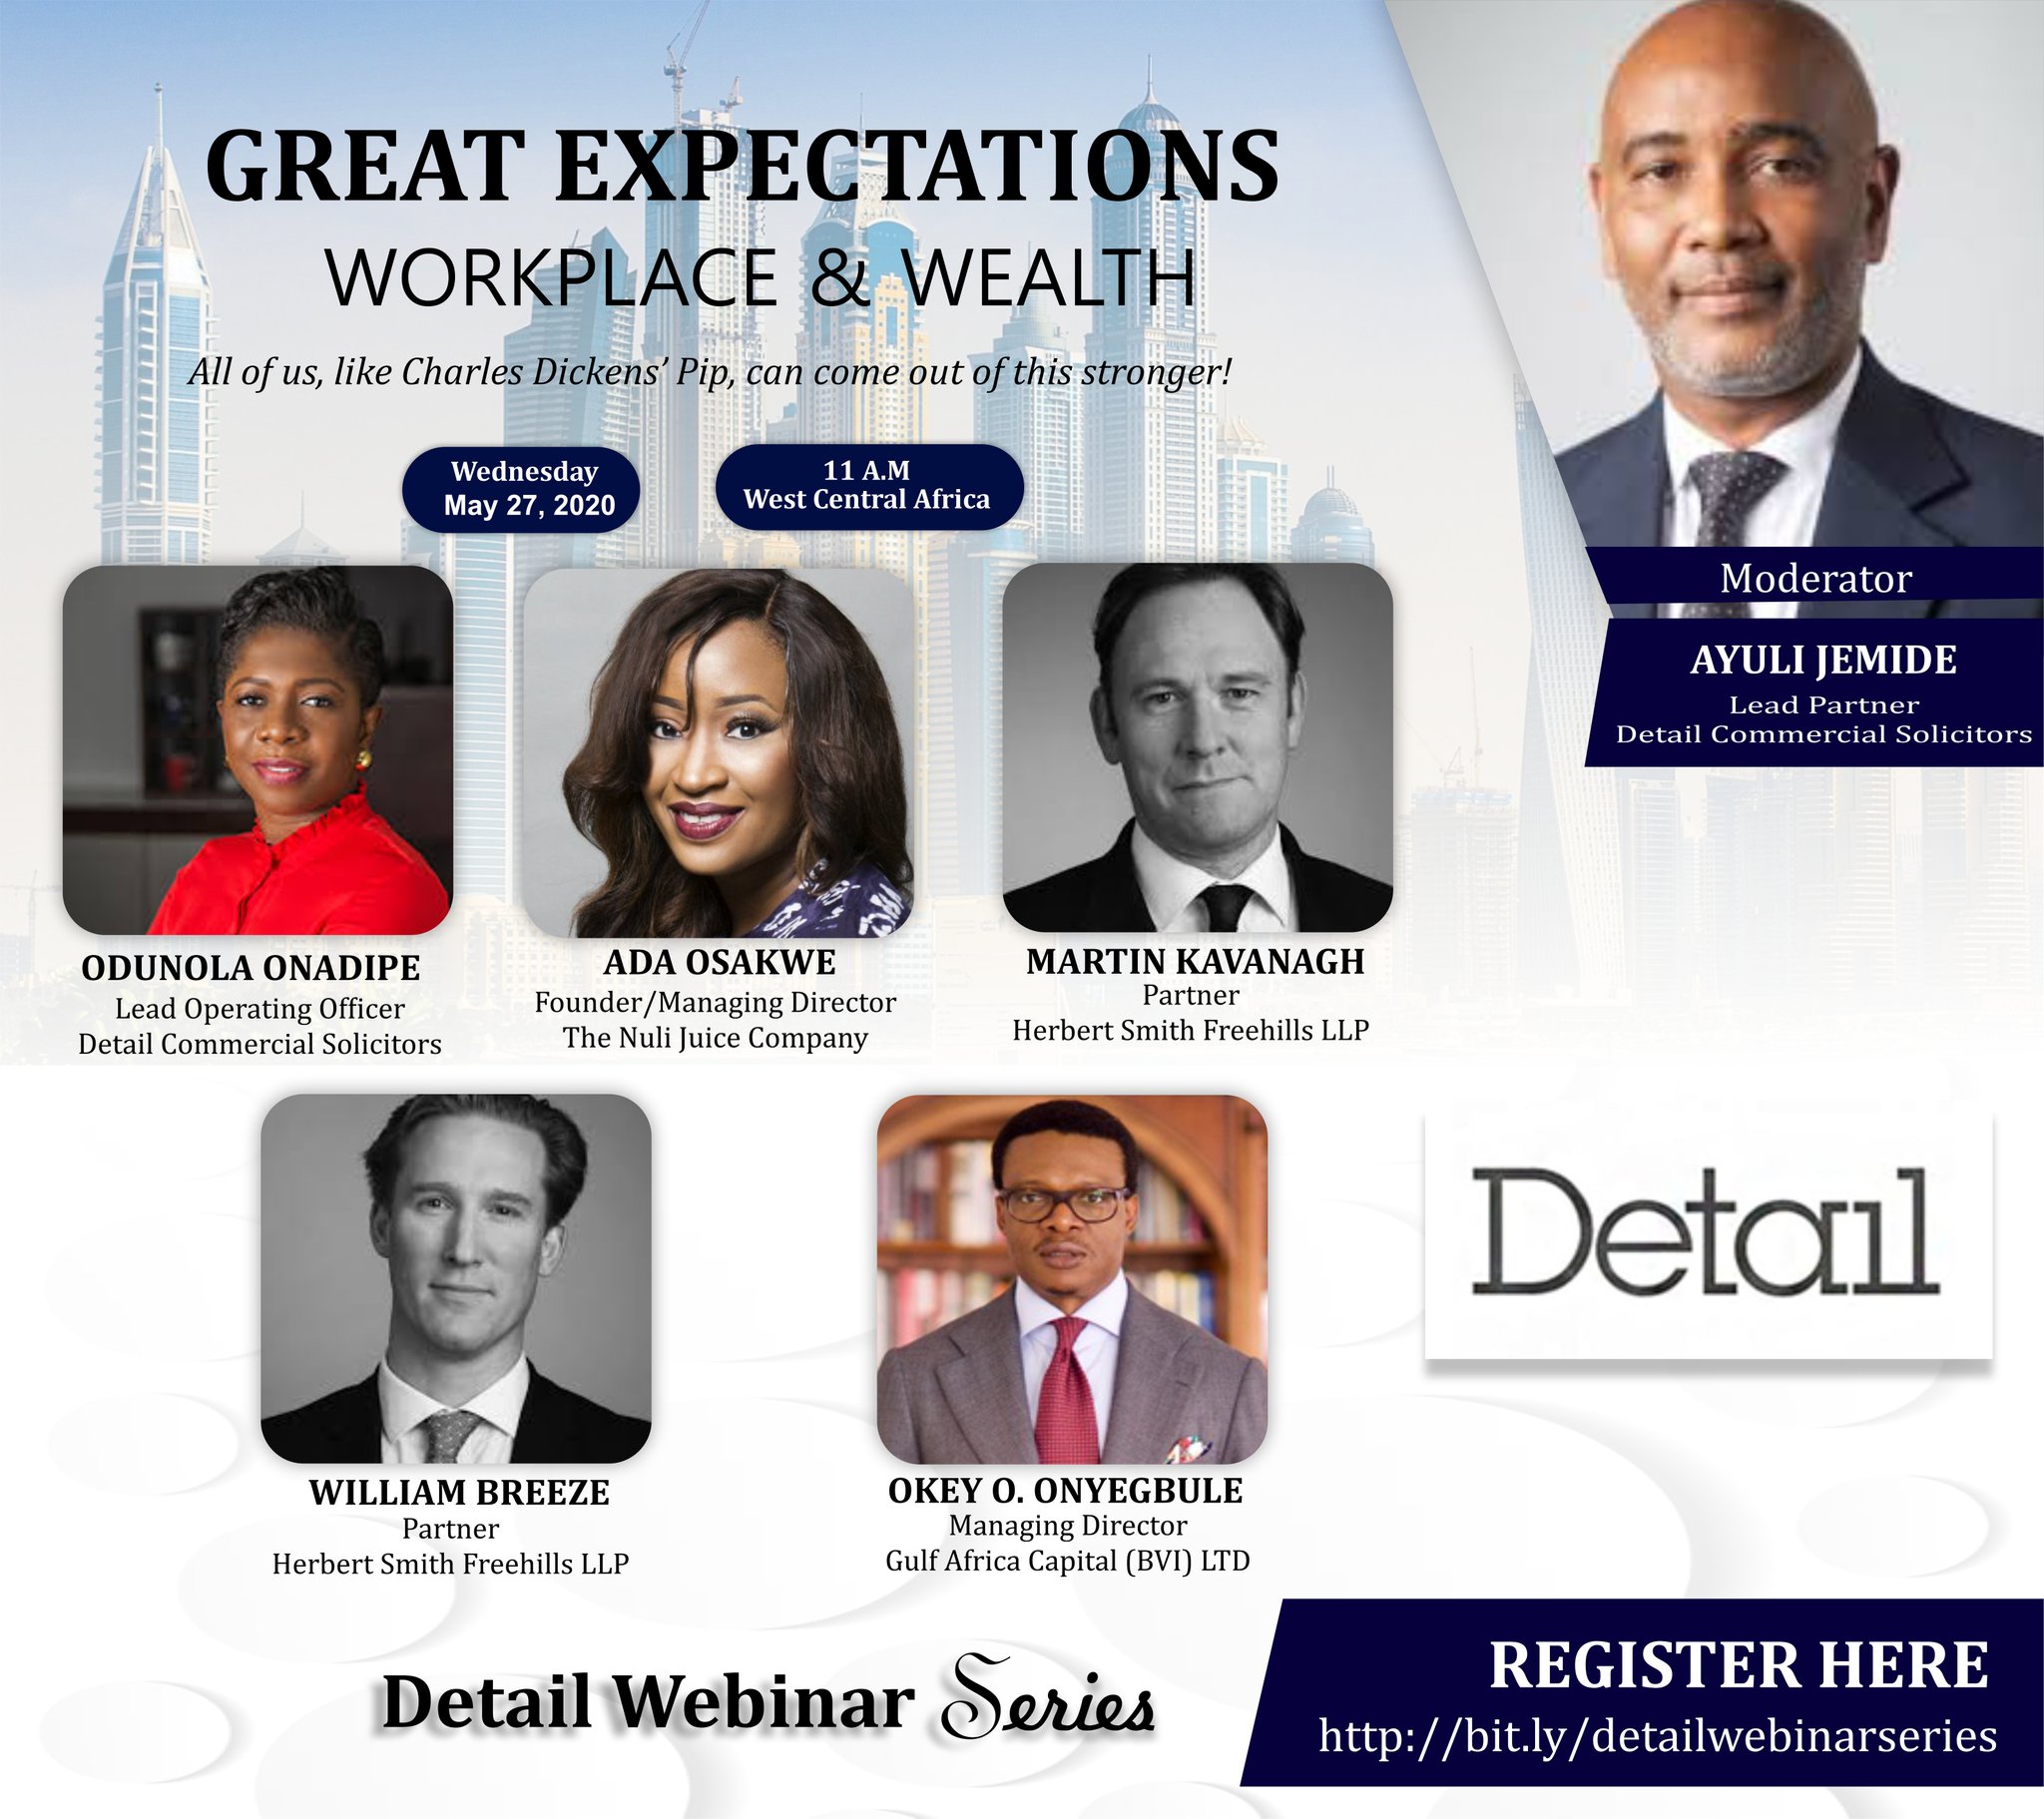 DETAIL hosts a webinar series on the topic: “Great Expectations- Workplace & Wealth”.